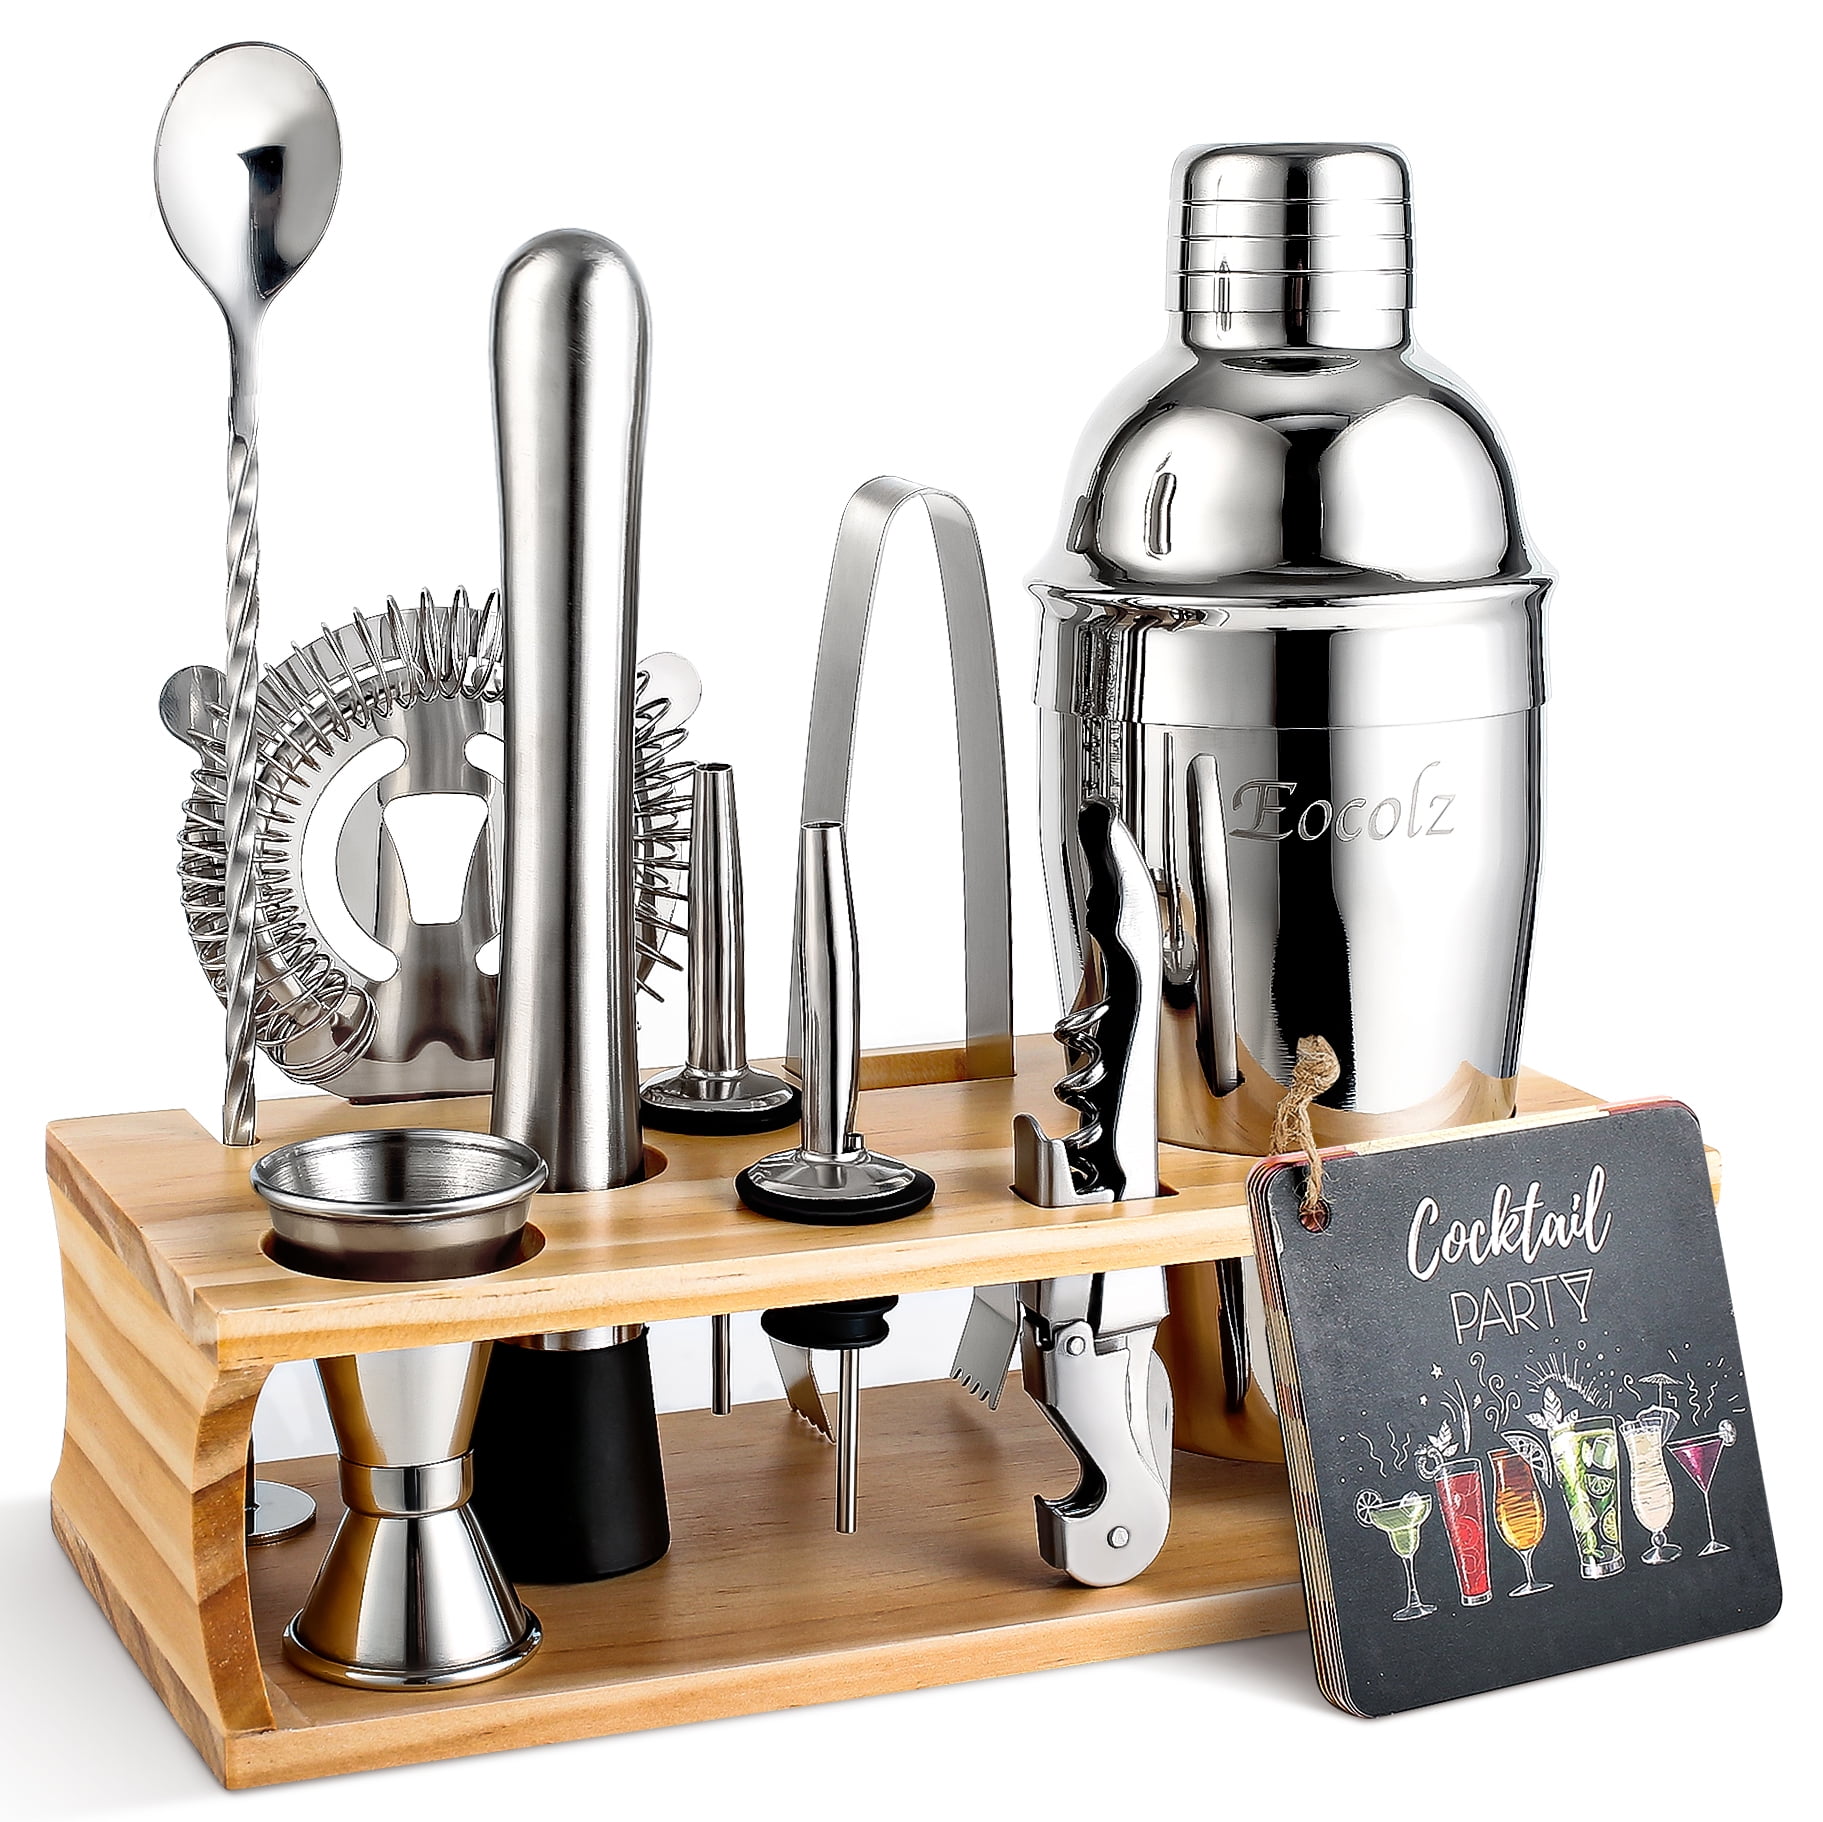 Tarmeek Kitchen Utensils & Gadgets Cocktail Shaker Set With Bamboo  Stand,10-Piece Set,Gifts For Men Dad Grandpa,Stainless Steel Bartender Kit  Bar